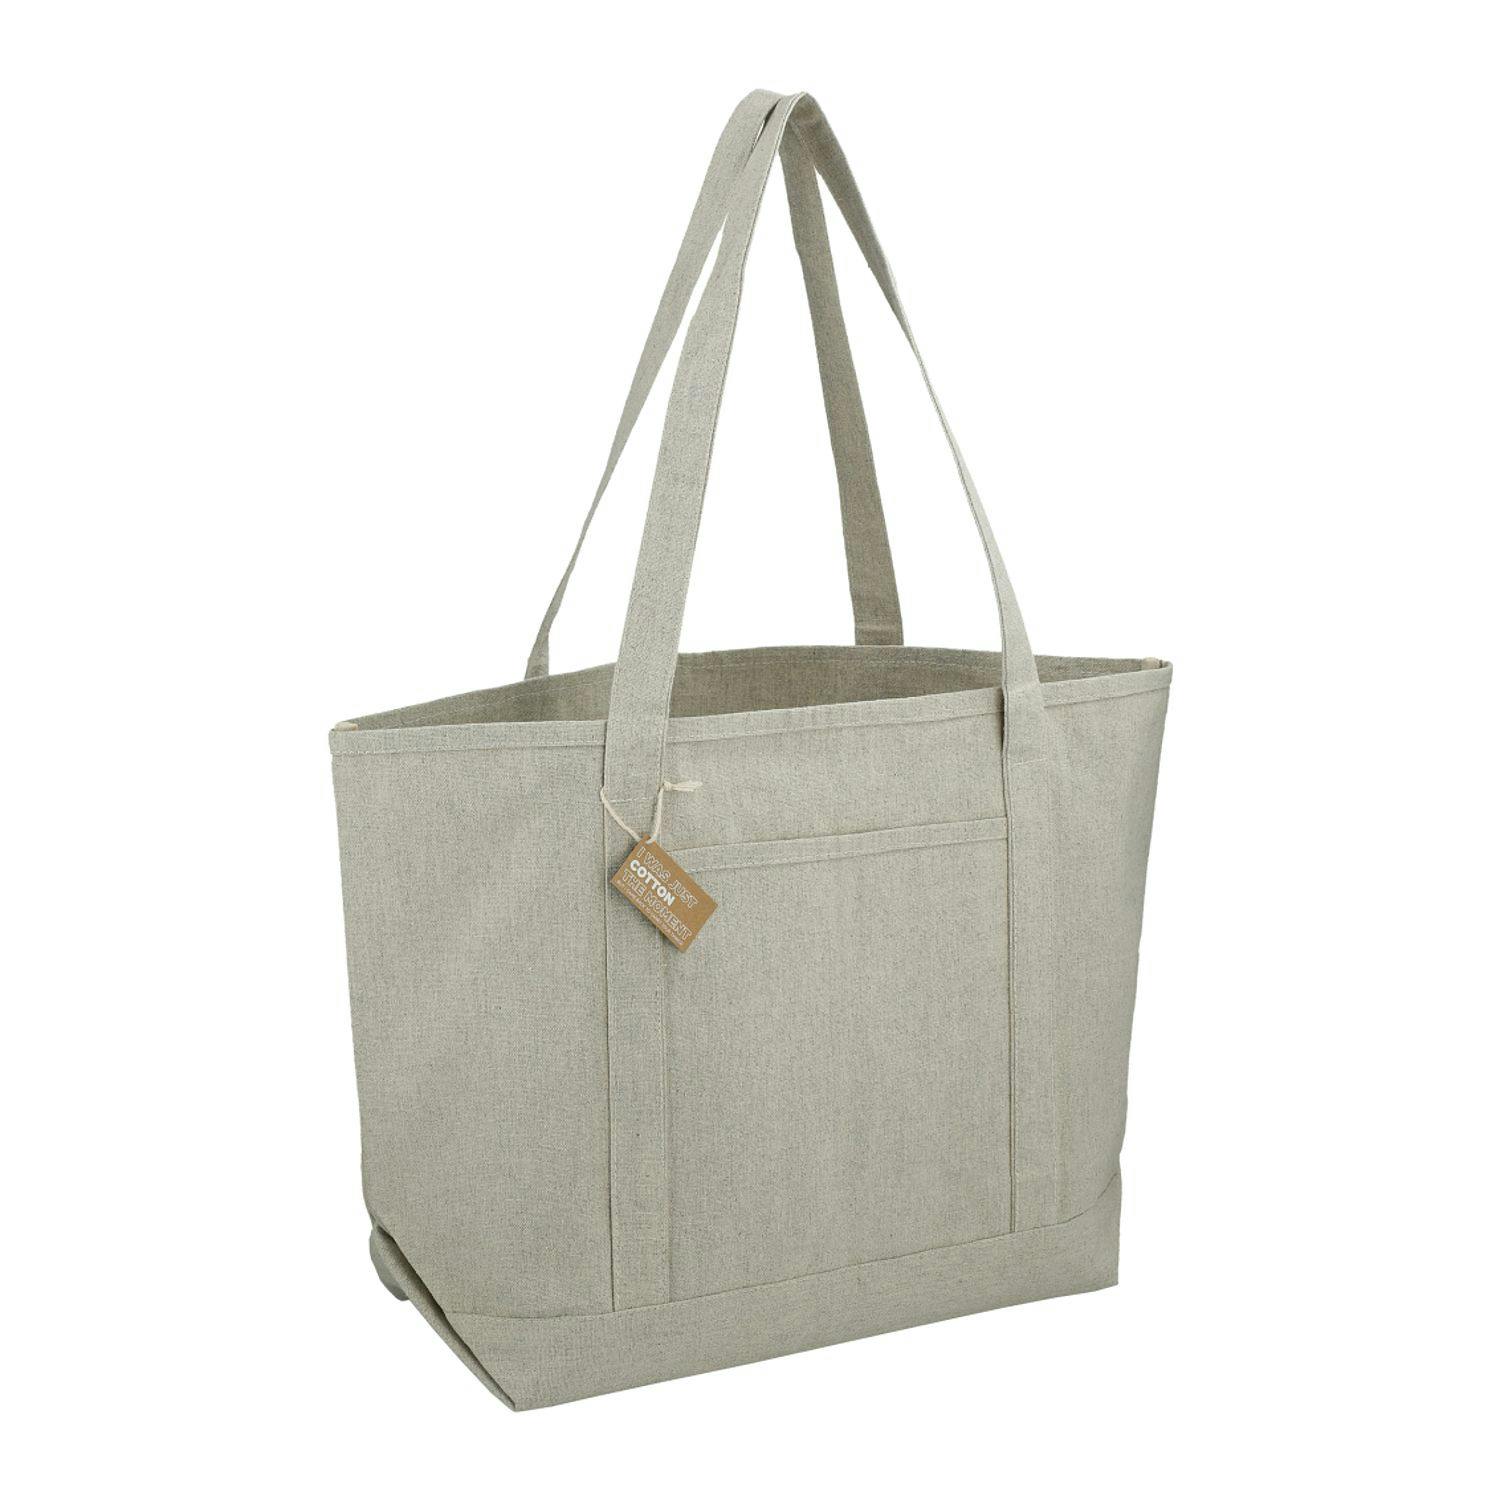 Repose 10oz Recycled Cotton Boat Tote - additional Image 3